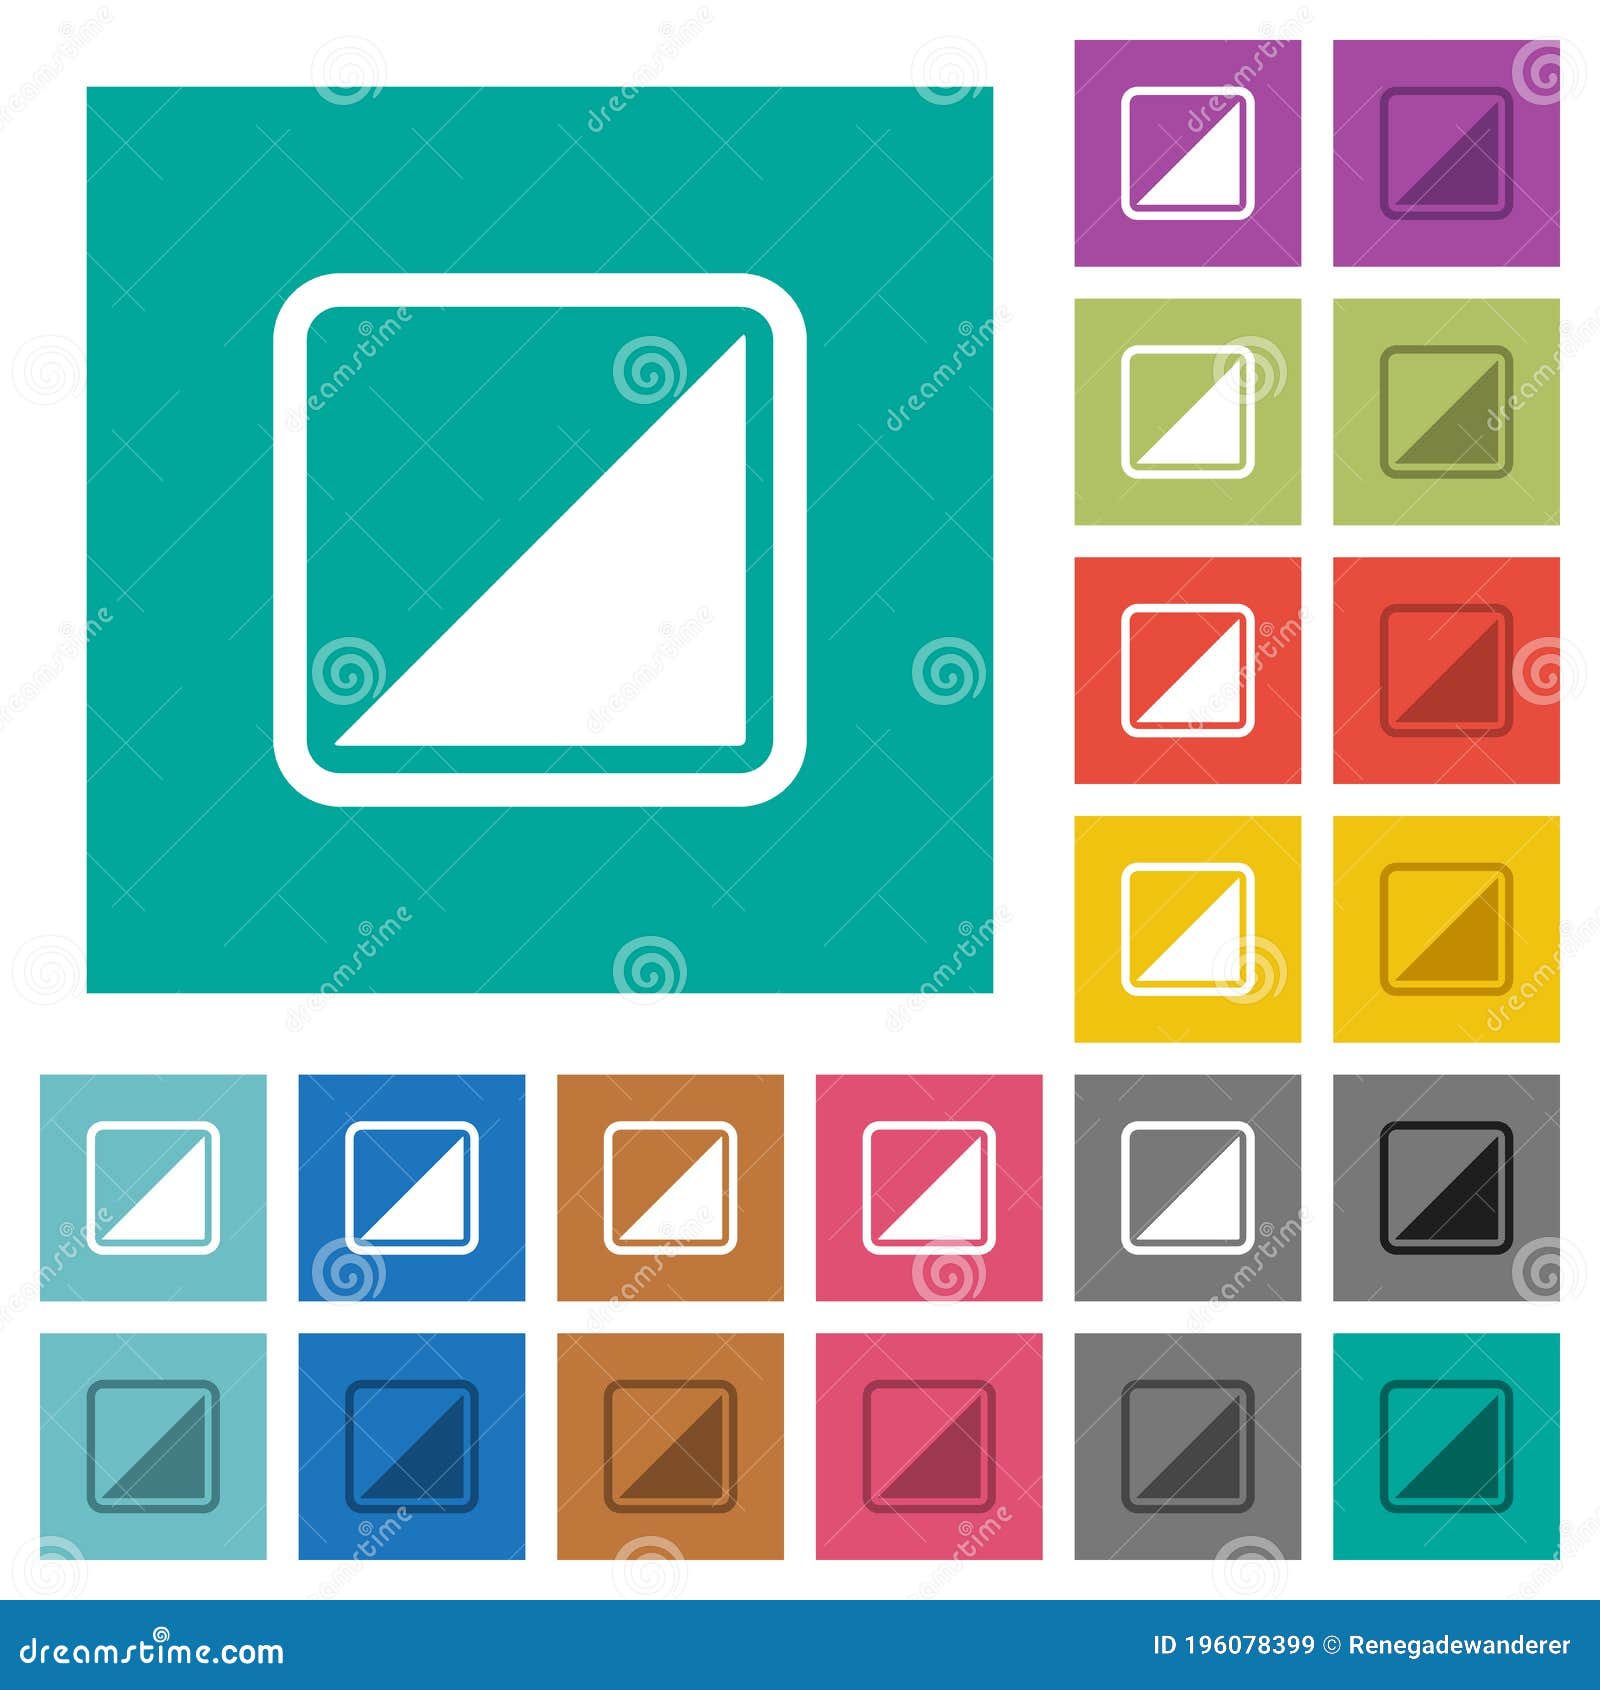 invert object square flat multi colored icons